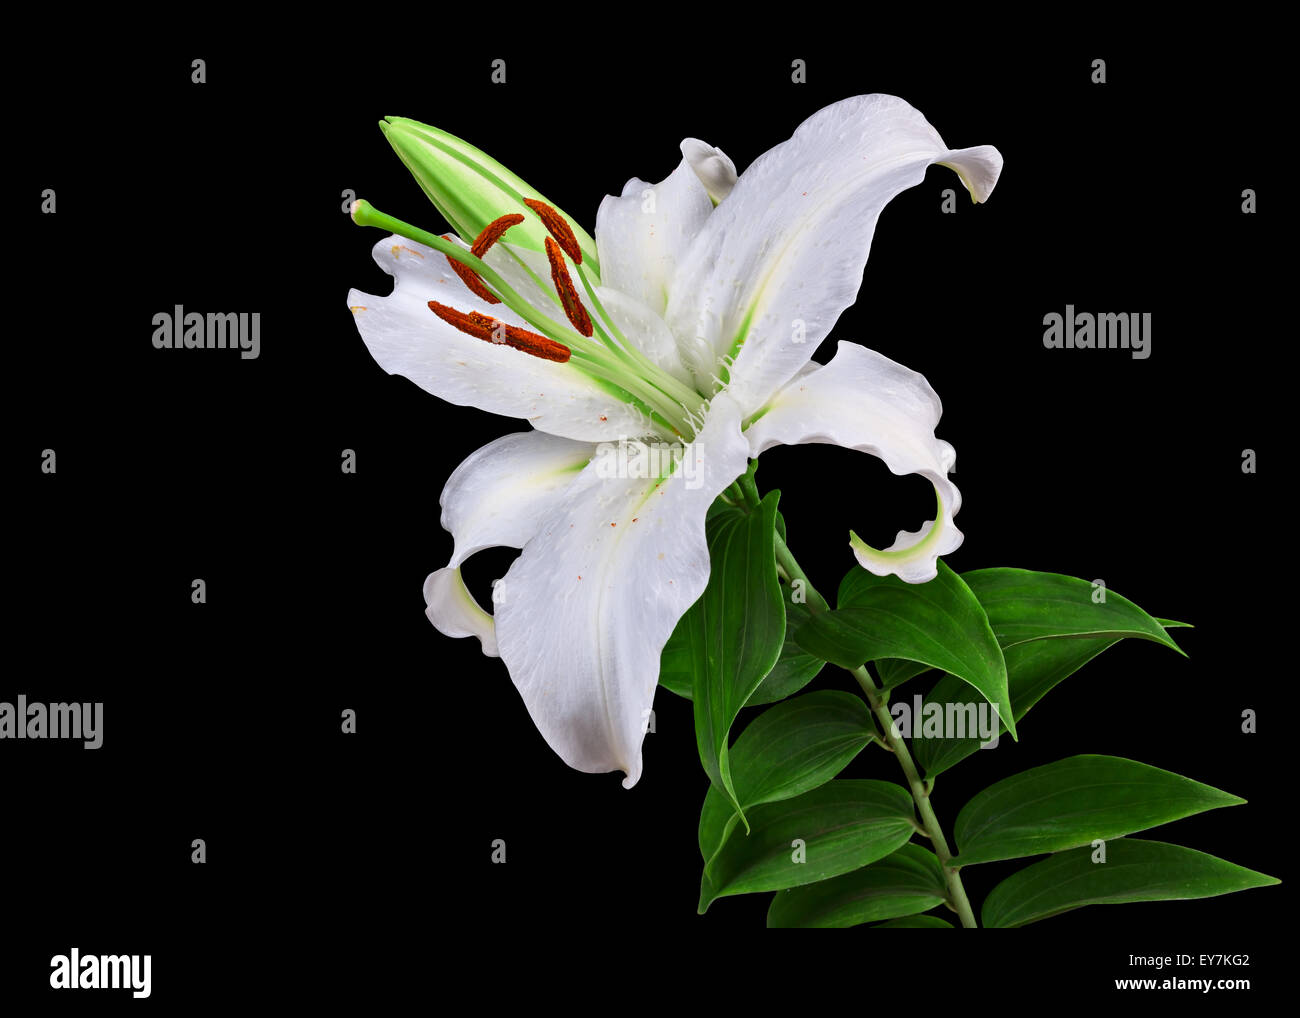 the flowers  lily isolated on black background Stock Photo